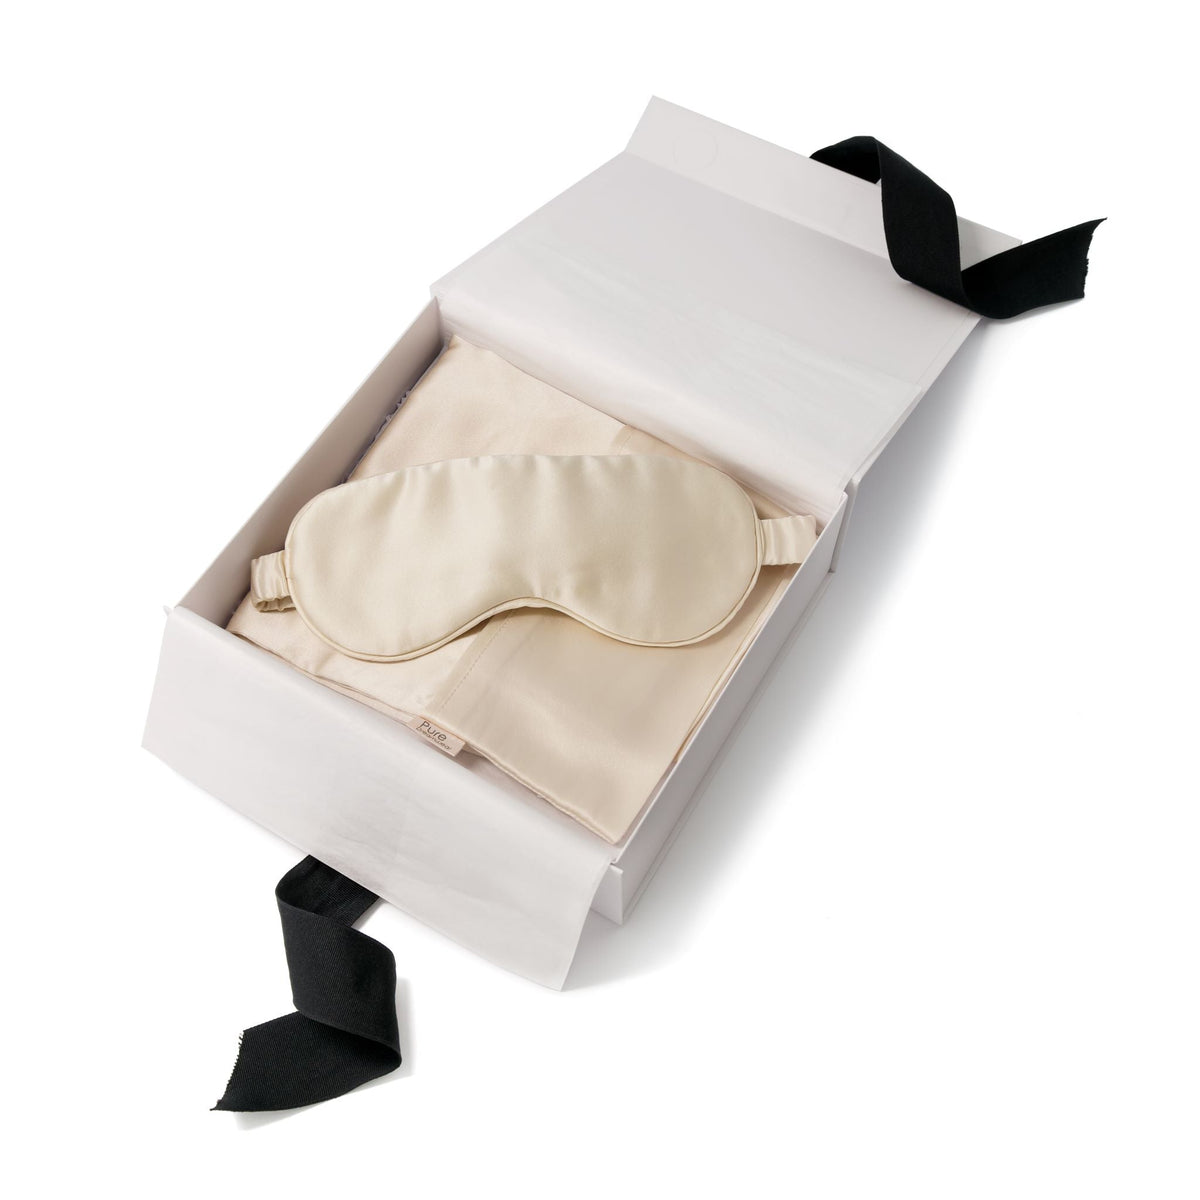 Ethical Pure Mulberry Silk Pillowcase and Eye Mask Set